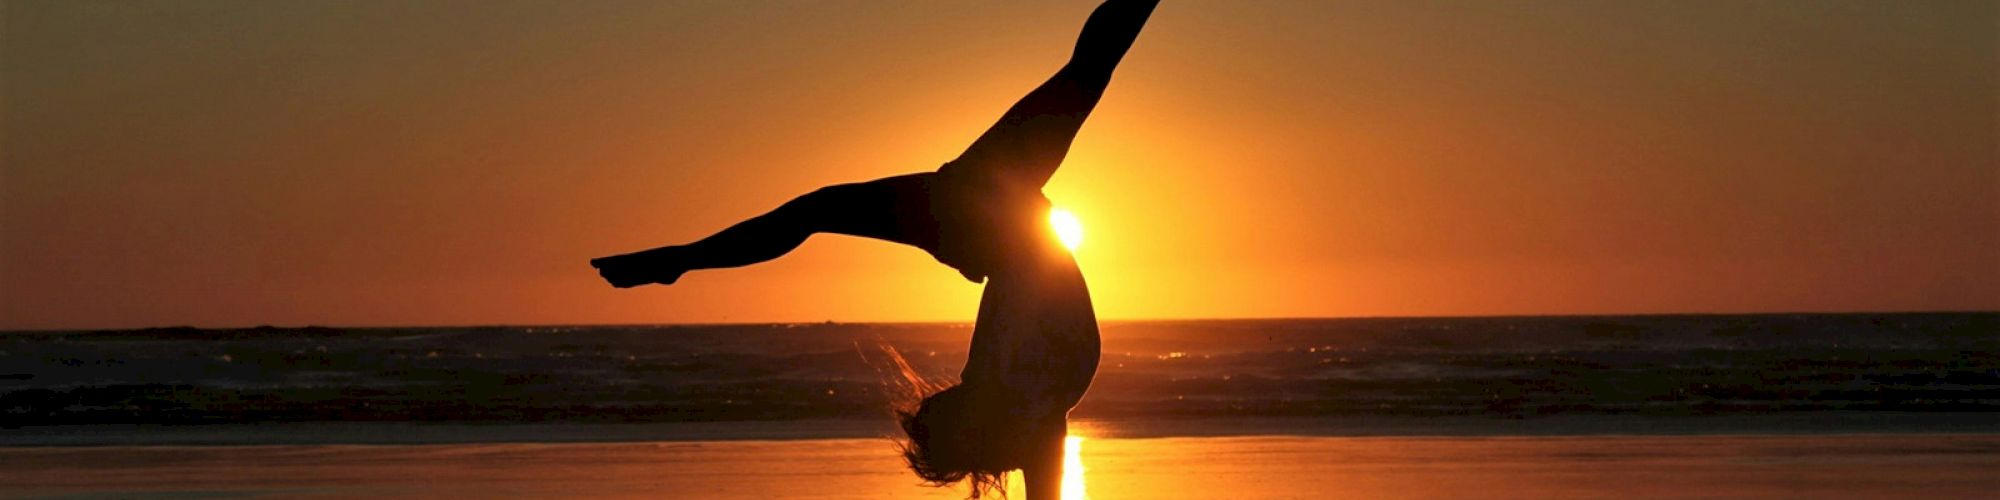 A person is doing a handstand on the beach during sunset, creating a striking silhouette against the vibrant sky and reflecting in the water.